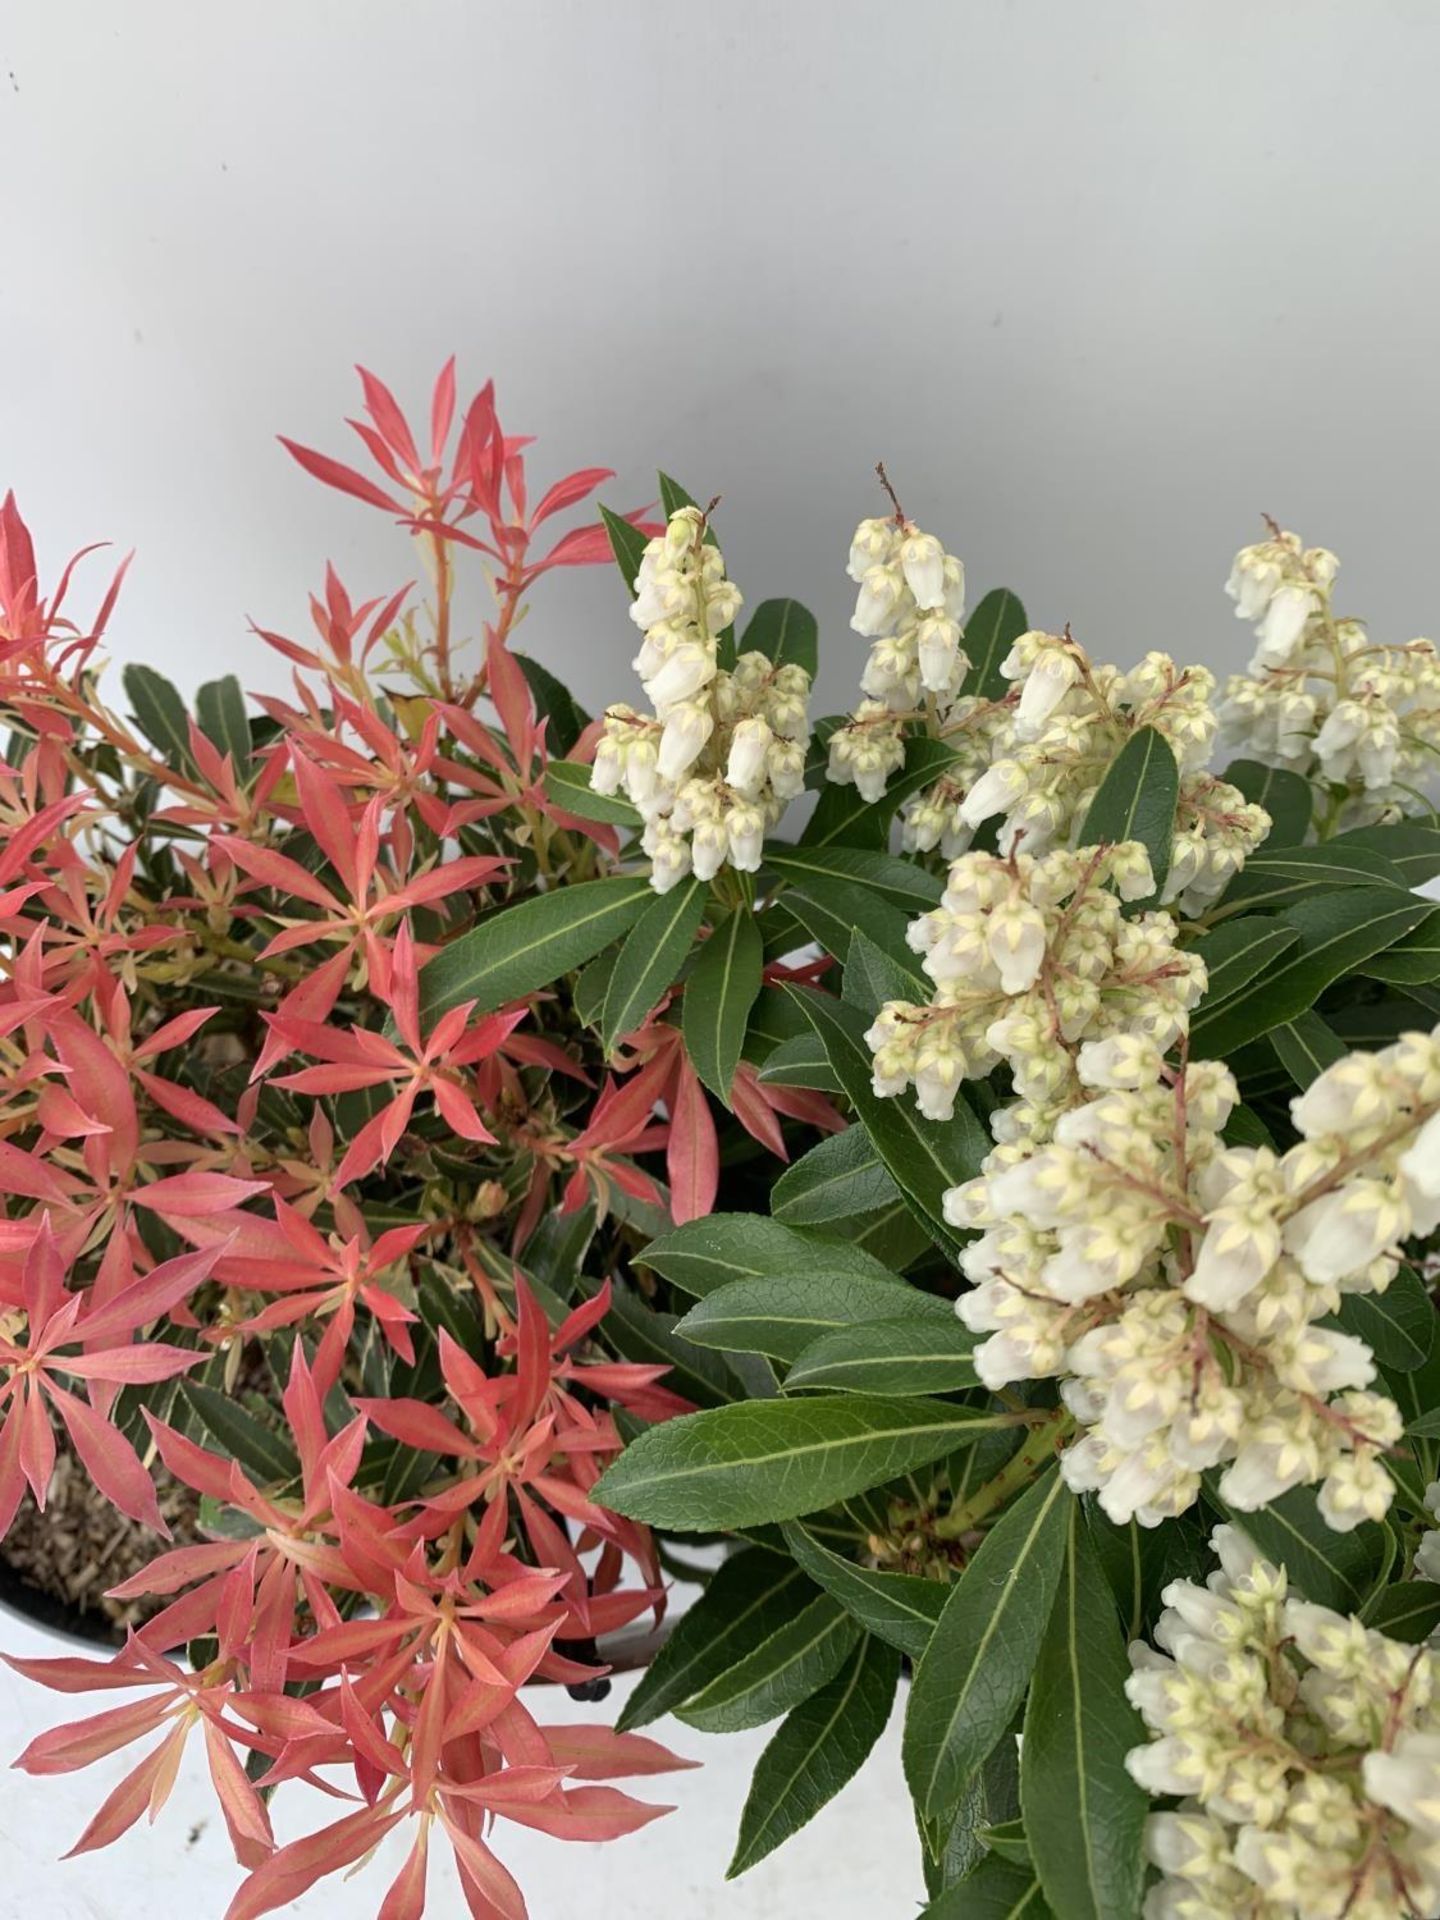 TWO PIERIS JAPONICA FORSET FLAME AND FLAMING SILVER IN 3 LTR POTS 40CM TALL PLUS VAT TO BE SOLD - Image 8 of 12